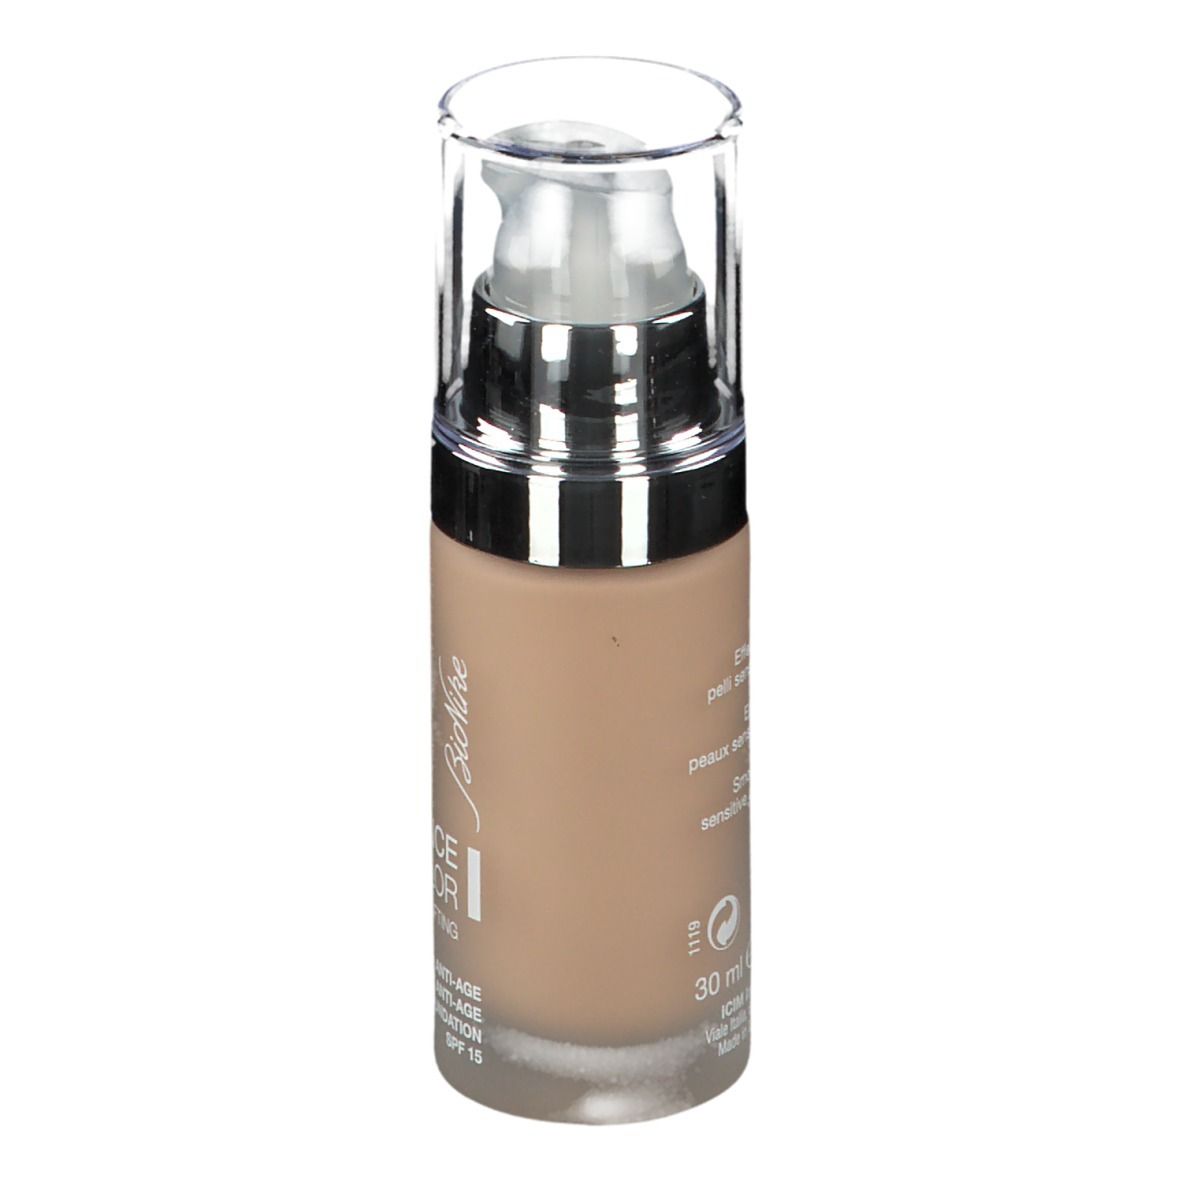 BioNike DEFENCE COLOR LIFTING Anti-Aging-Foundation 203 Beige